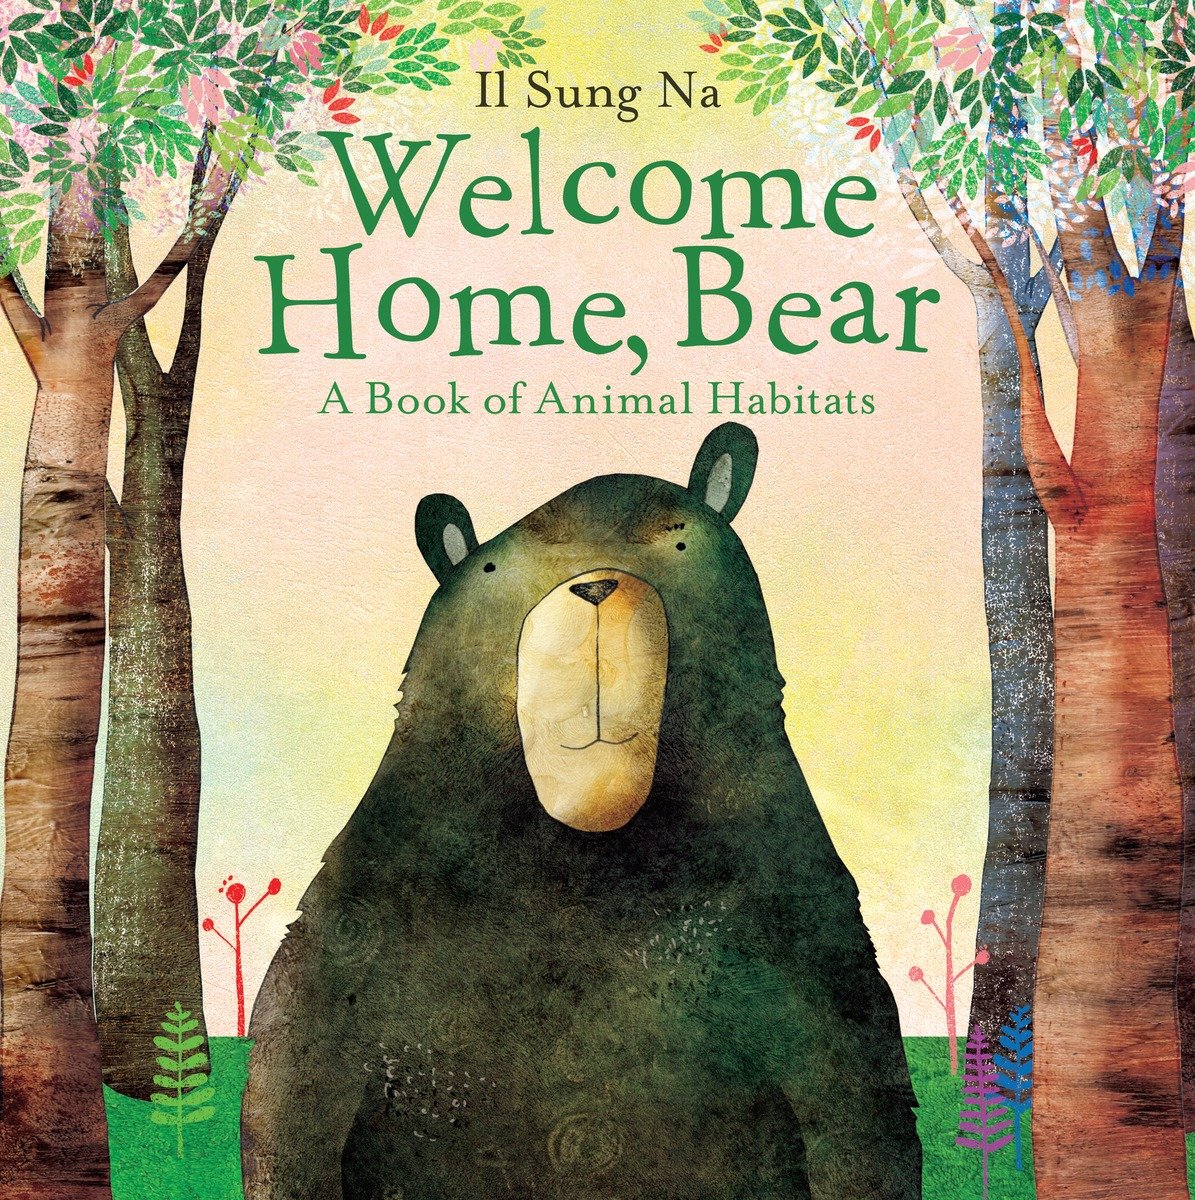 Welcome home, bear a book of animal habitats cover image